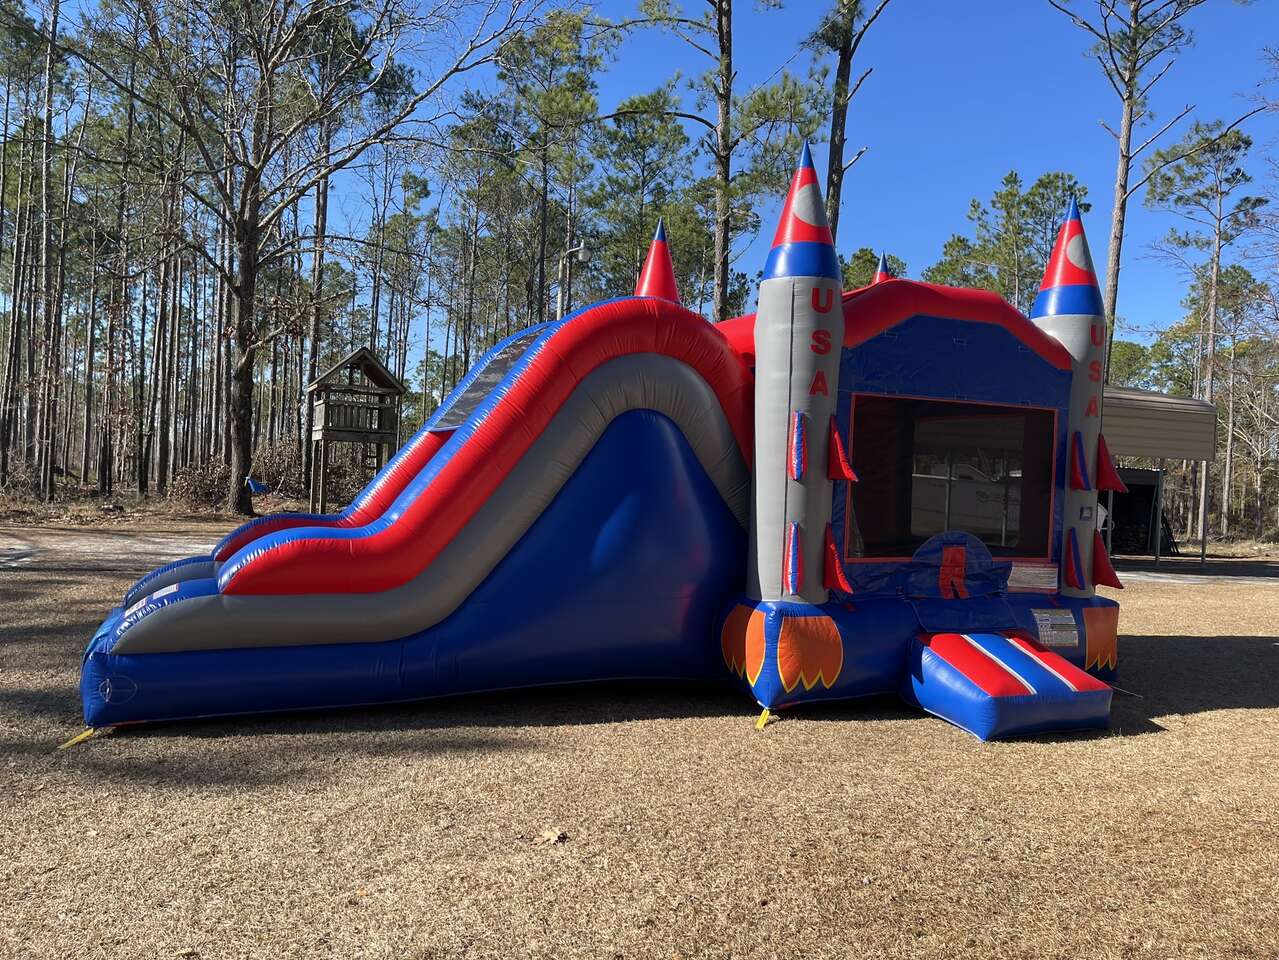 Blue, red, and gray USA rocket themed bounce house with slide